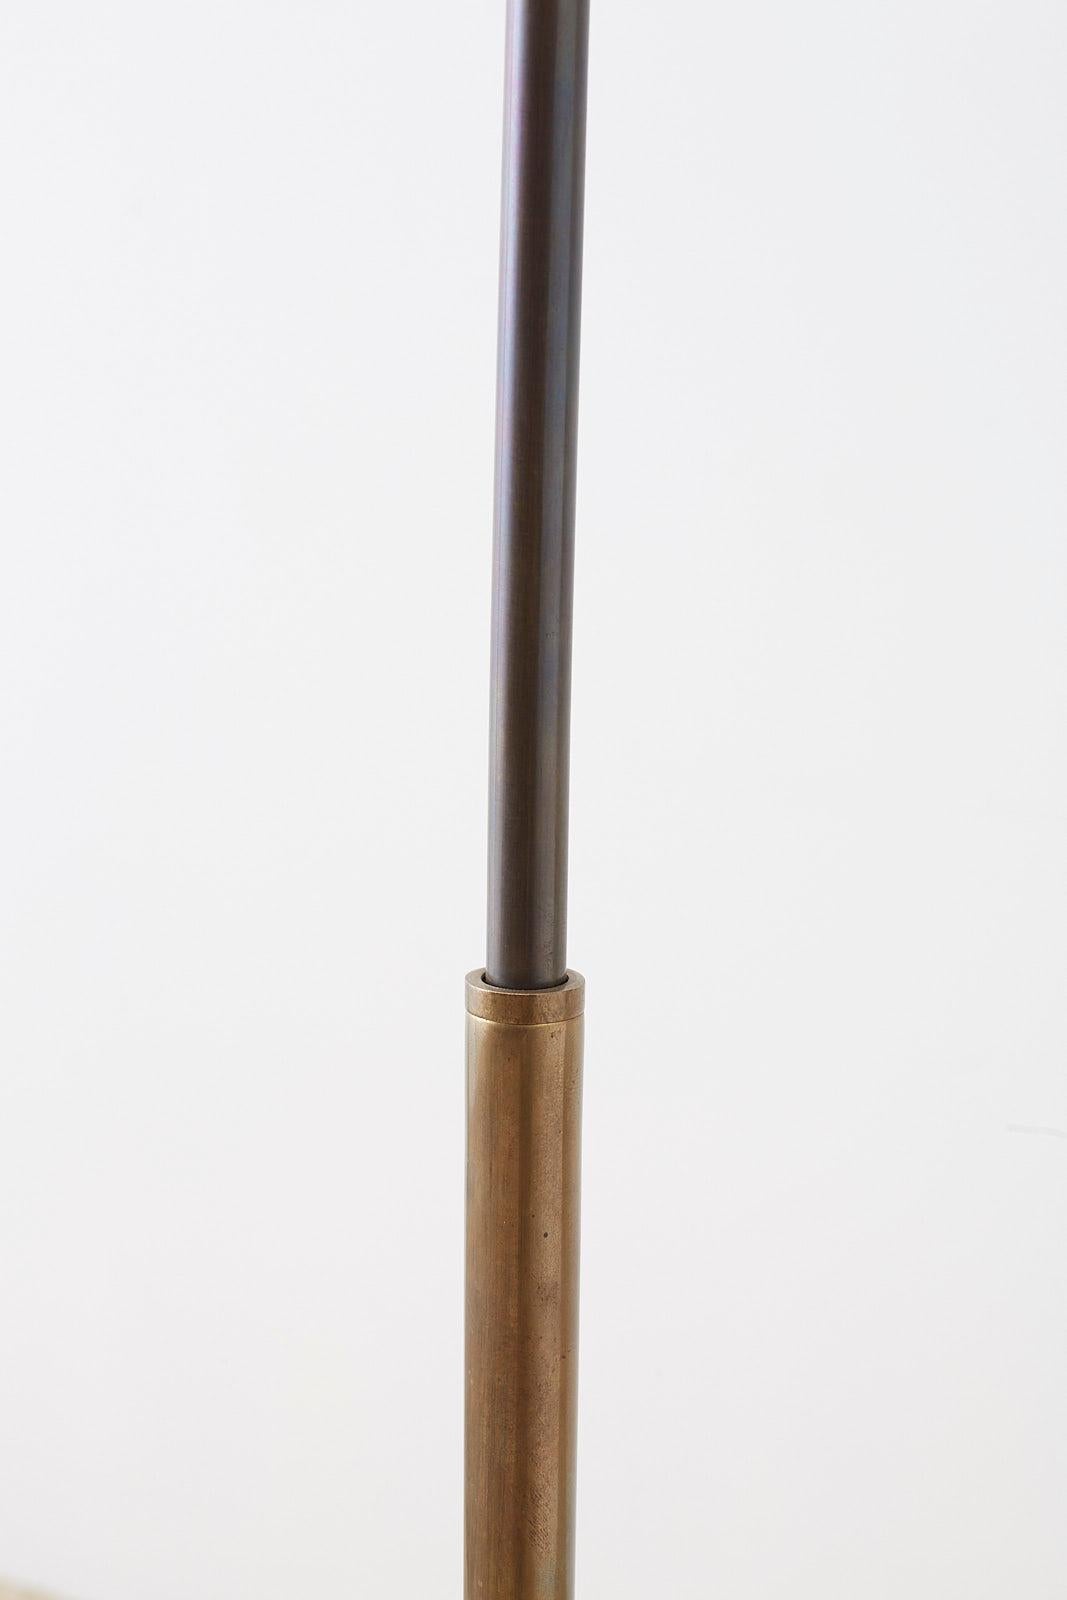 Hand-Crafted Bronze Adjustable Pharmacy Floor Lamp Attributed to Casella